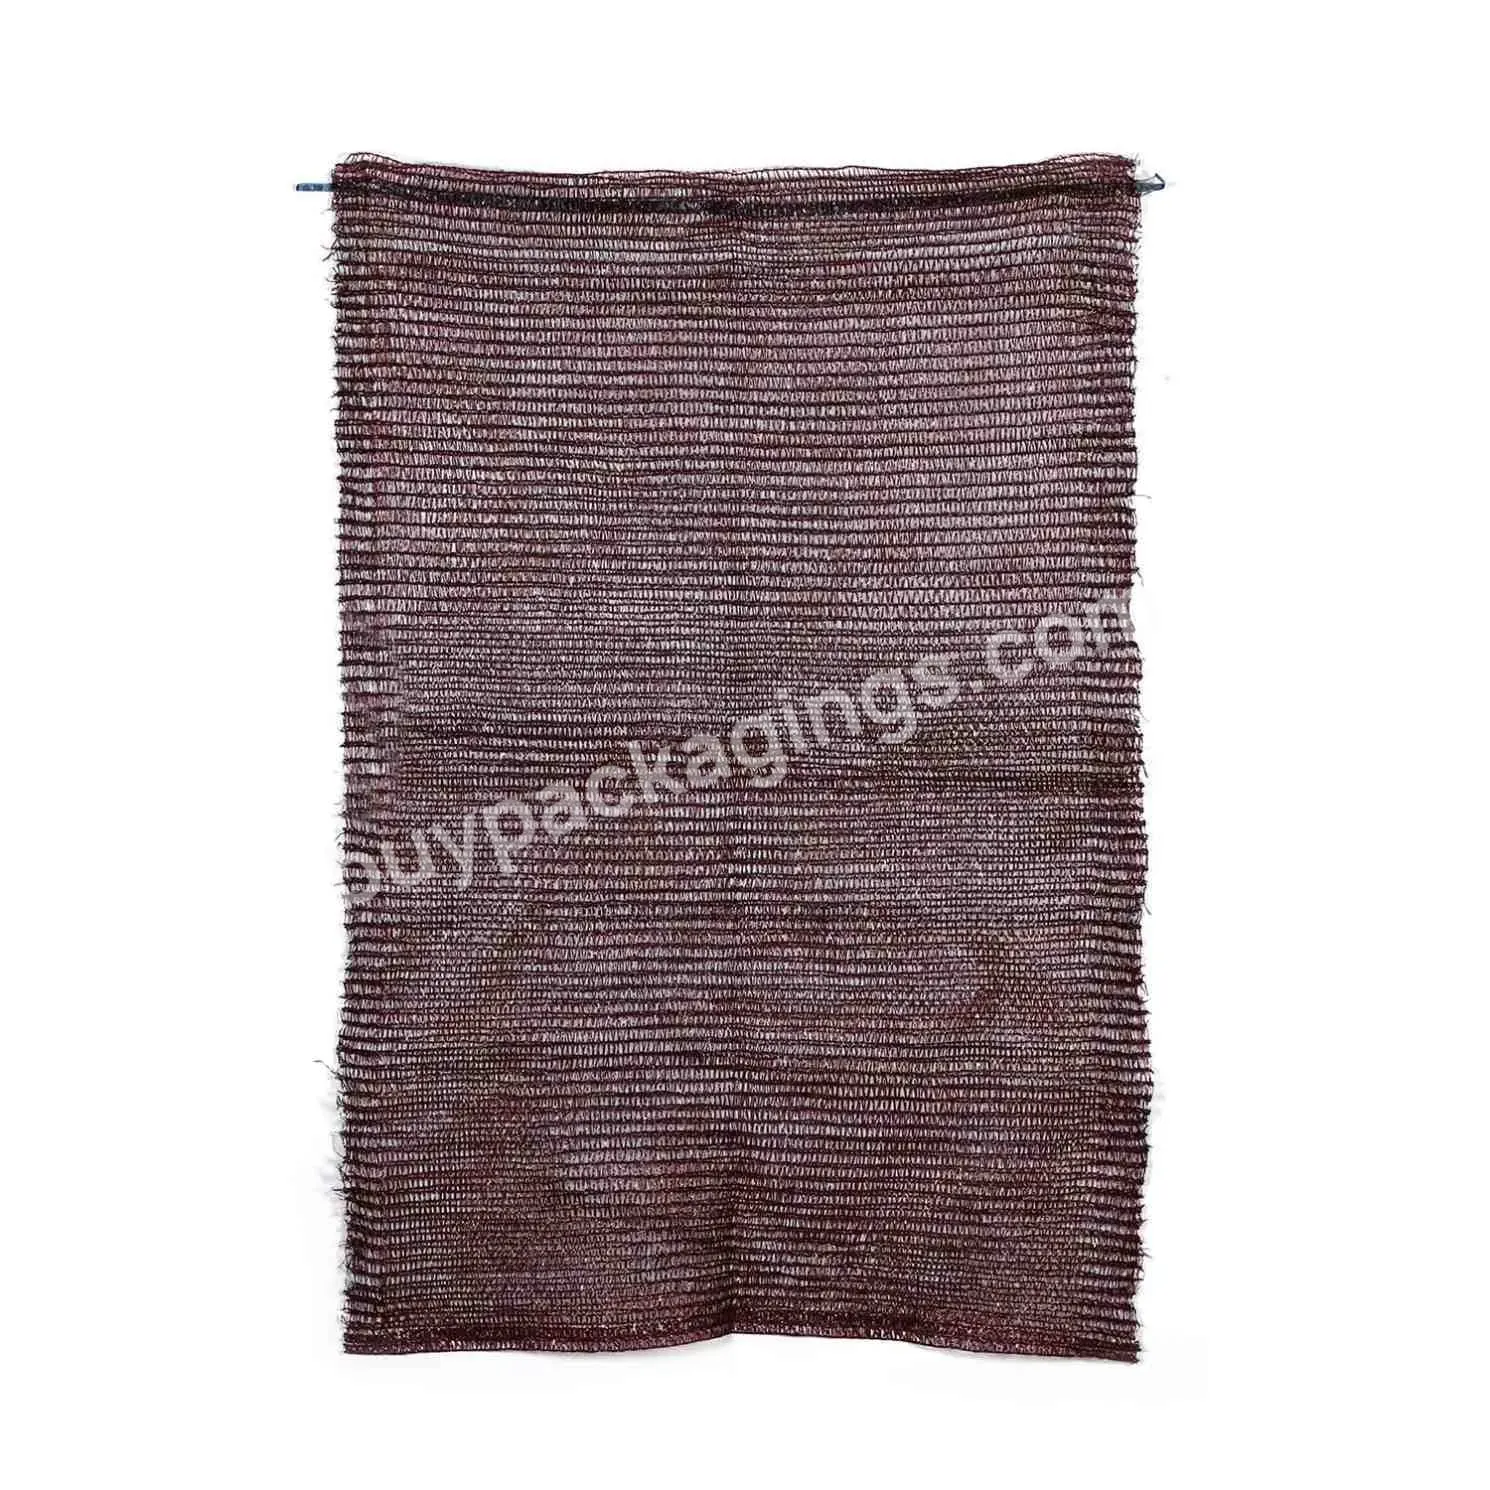 Pp Mesh Grs Approved Factory Agriculture Plastic Packaging Garlic Potato Pe Raschel Net Sack For Vegetable And Fruit - Buy Mesh Bag Onion,Mesh Bag For Garlic,Mesh Bag For Firewood.